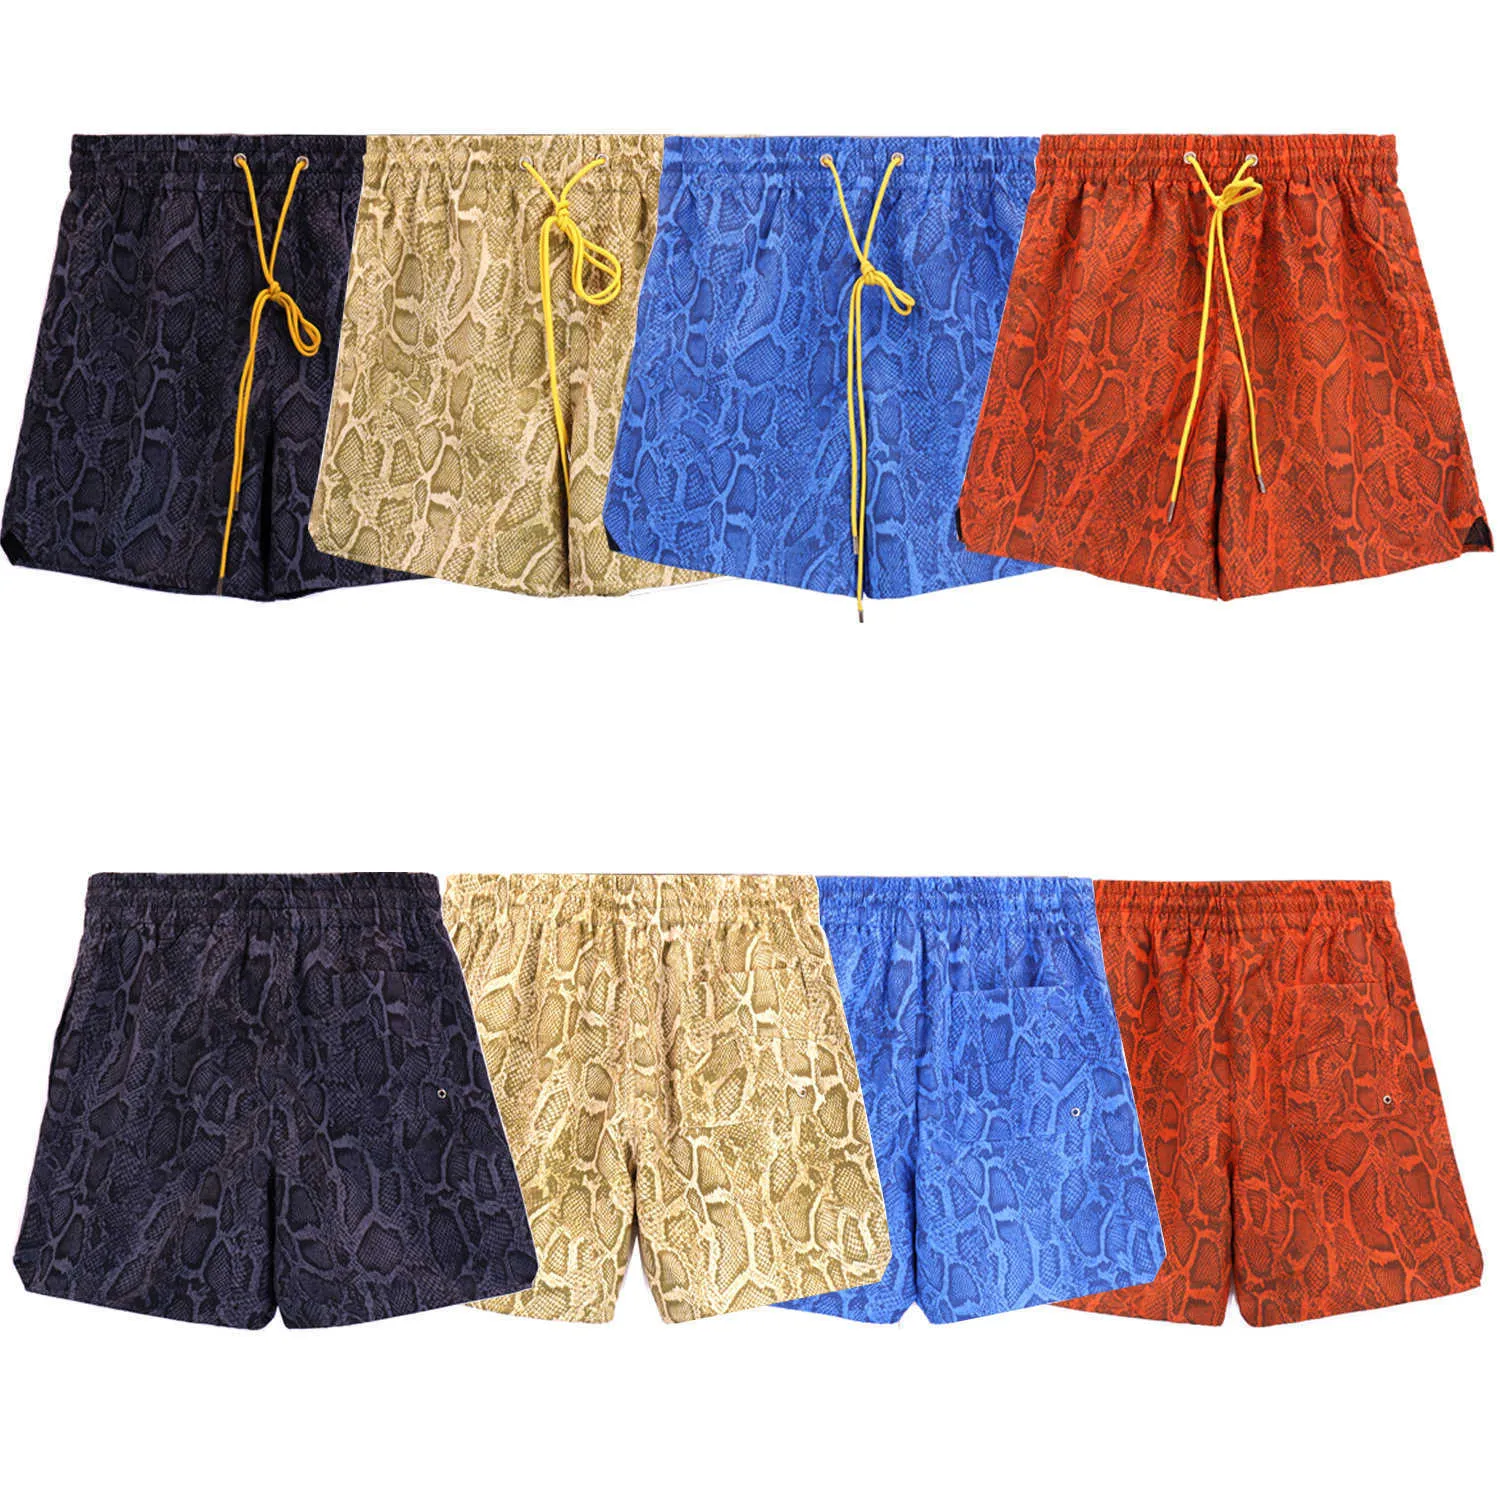 High version rhude snake print high street casual drawstring shorts for trendy spring and summer